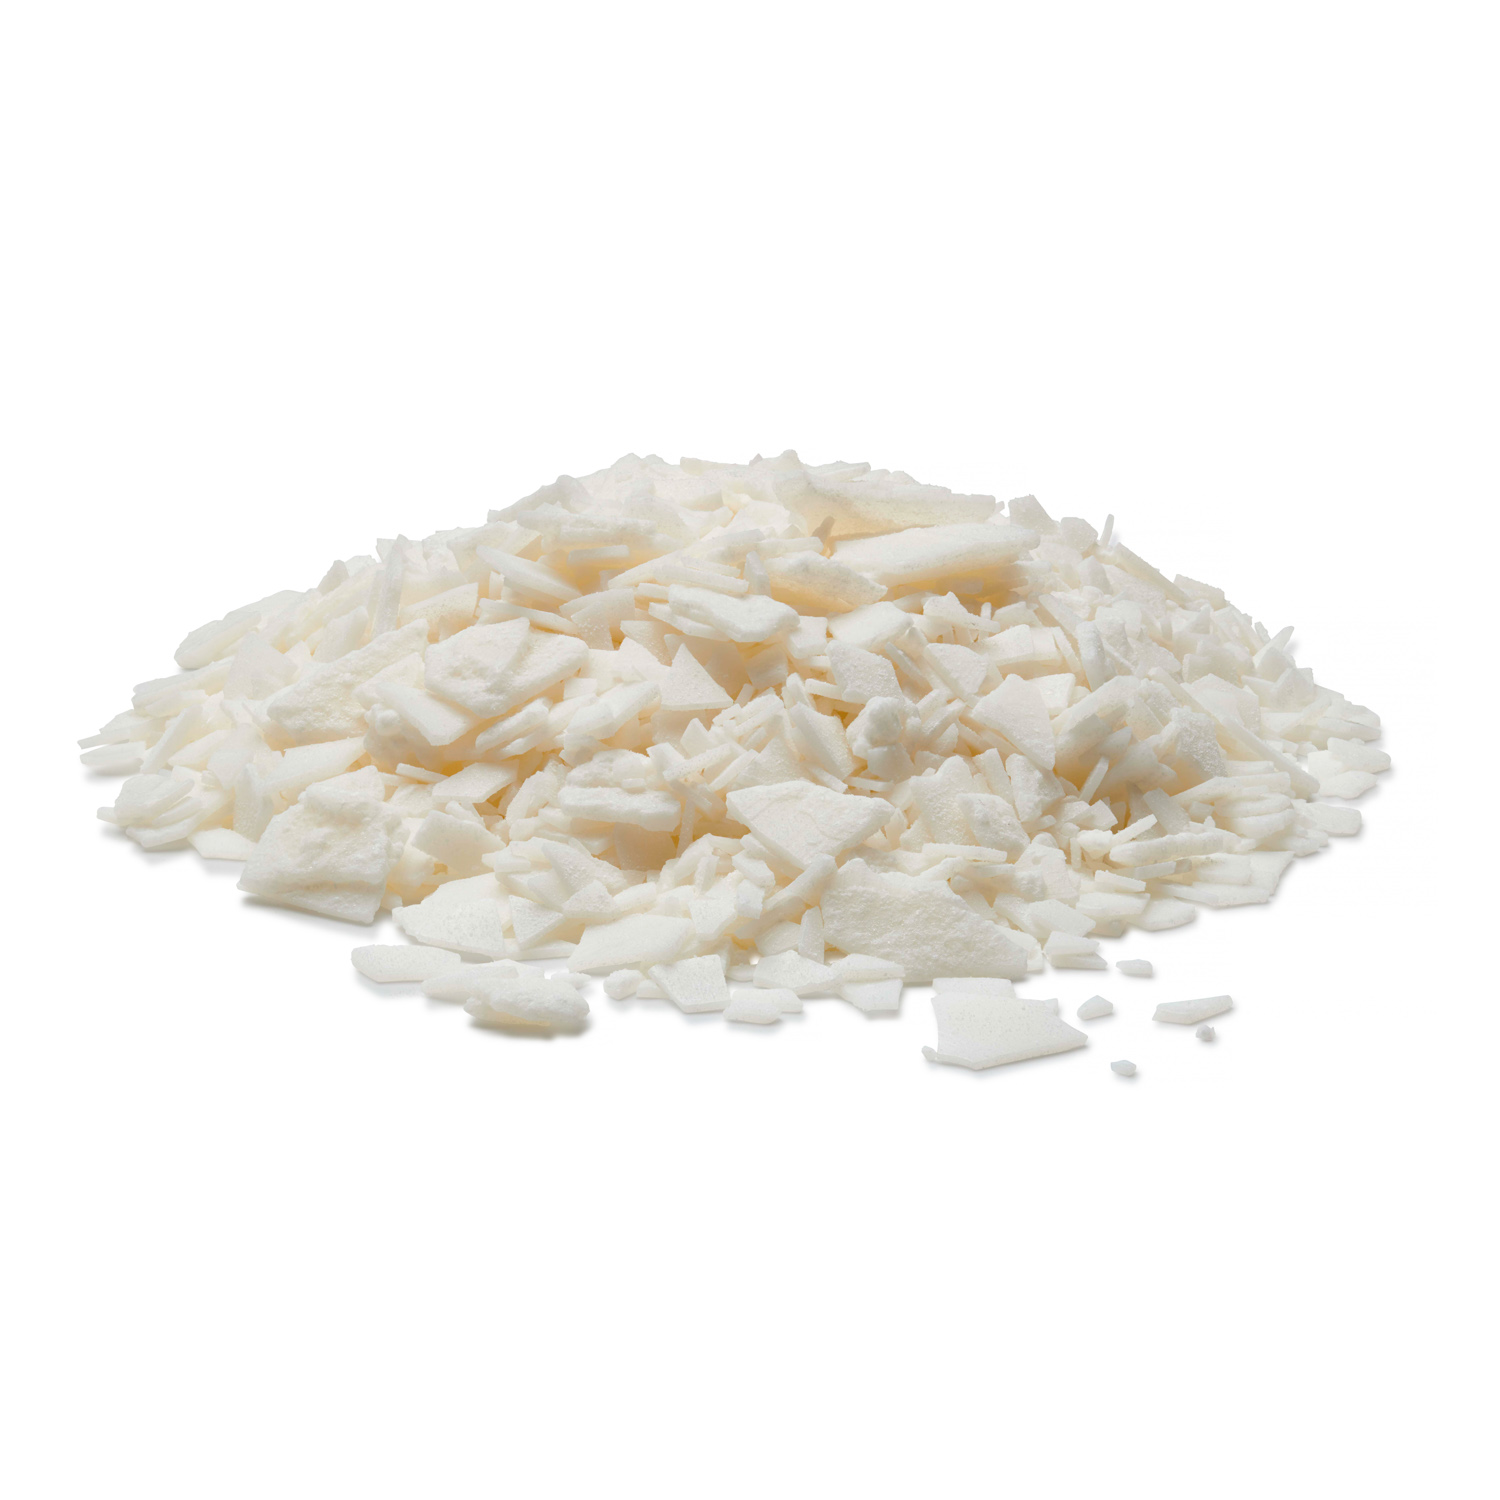 Flakes of Castor Wax